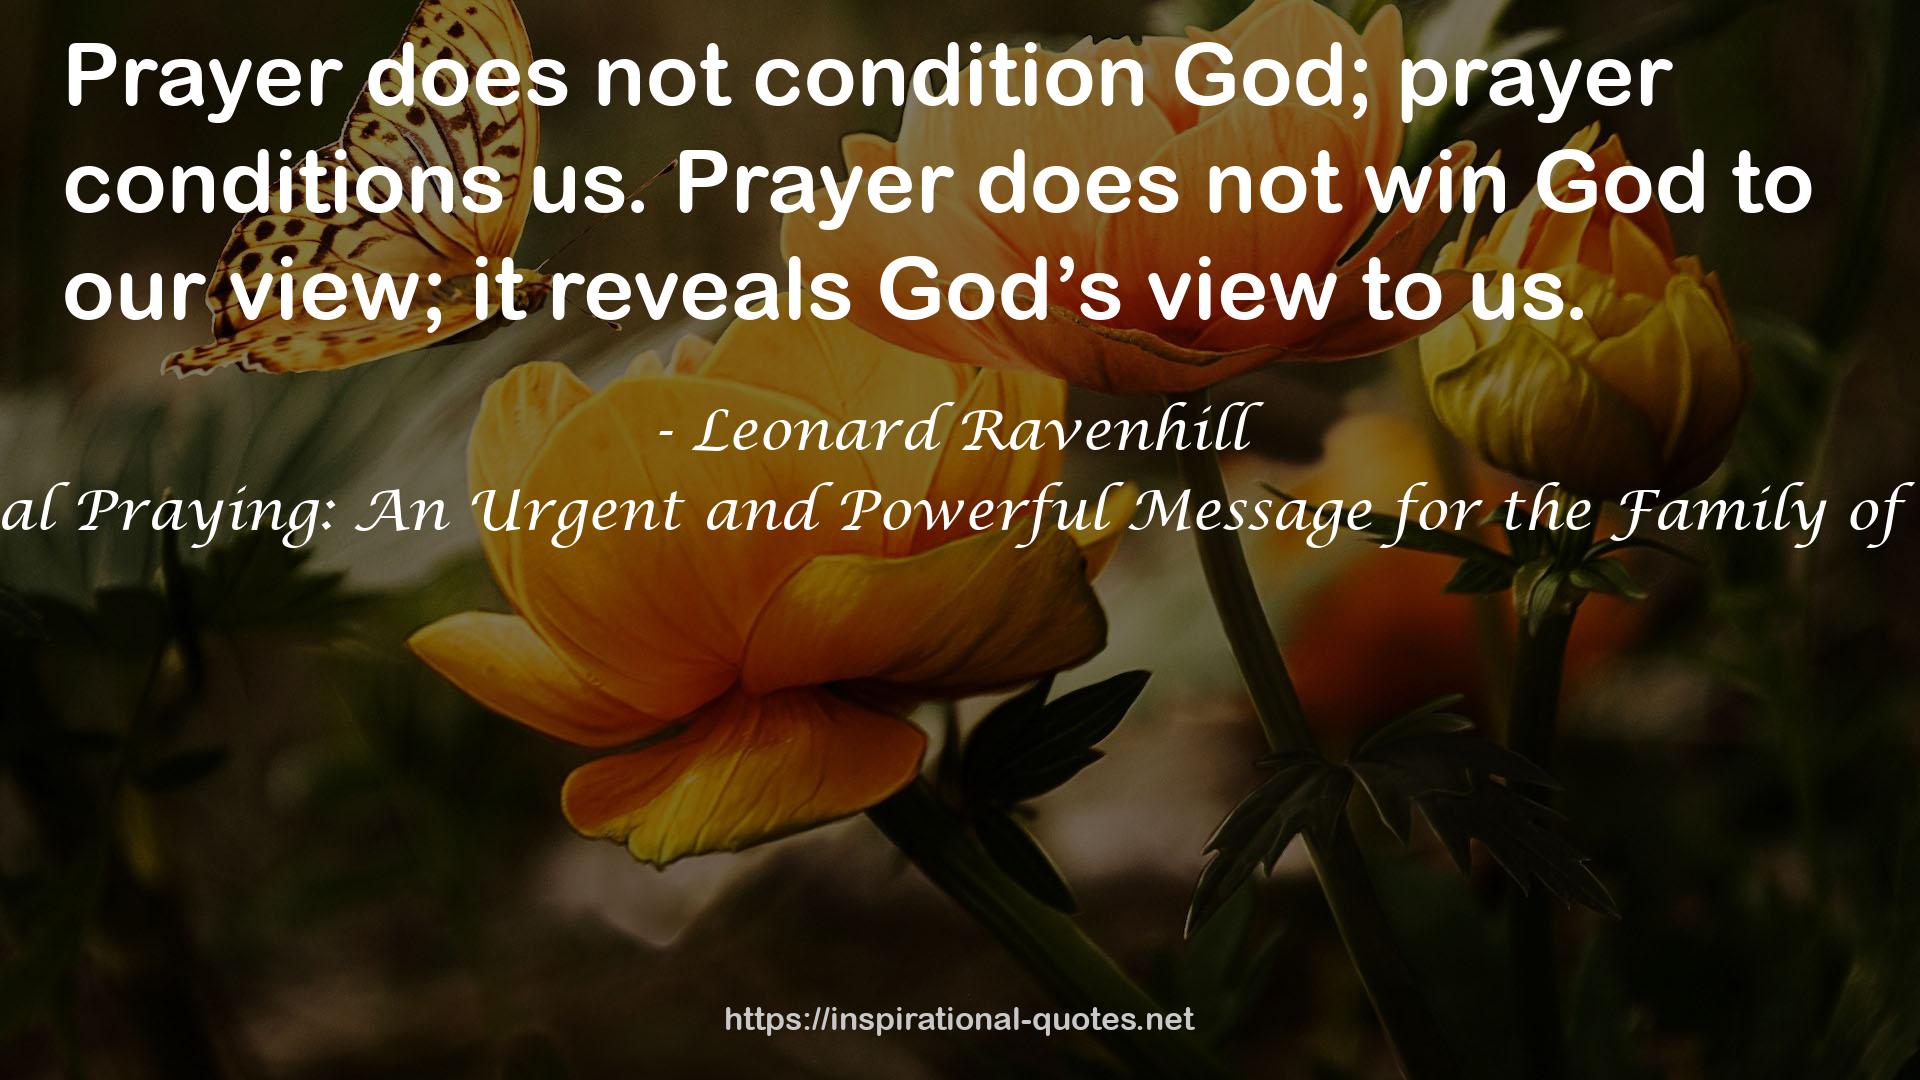 Revival Praying: An Urgent and Powerful Message for the Family of Christ QUOTES